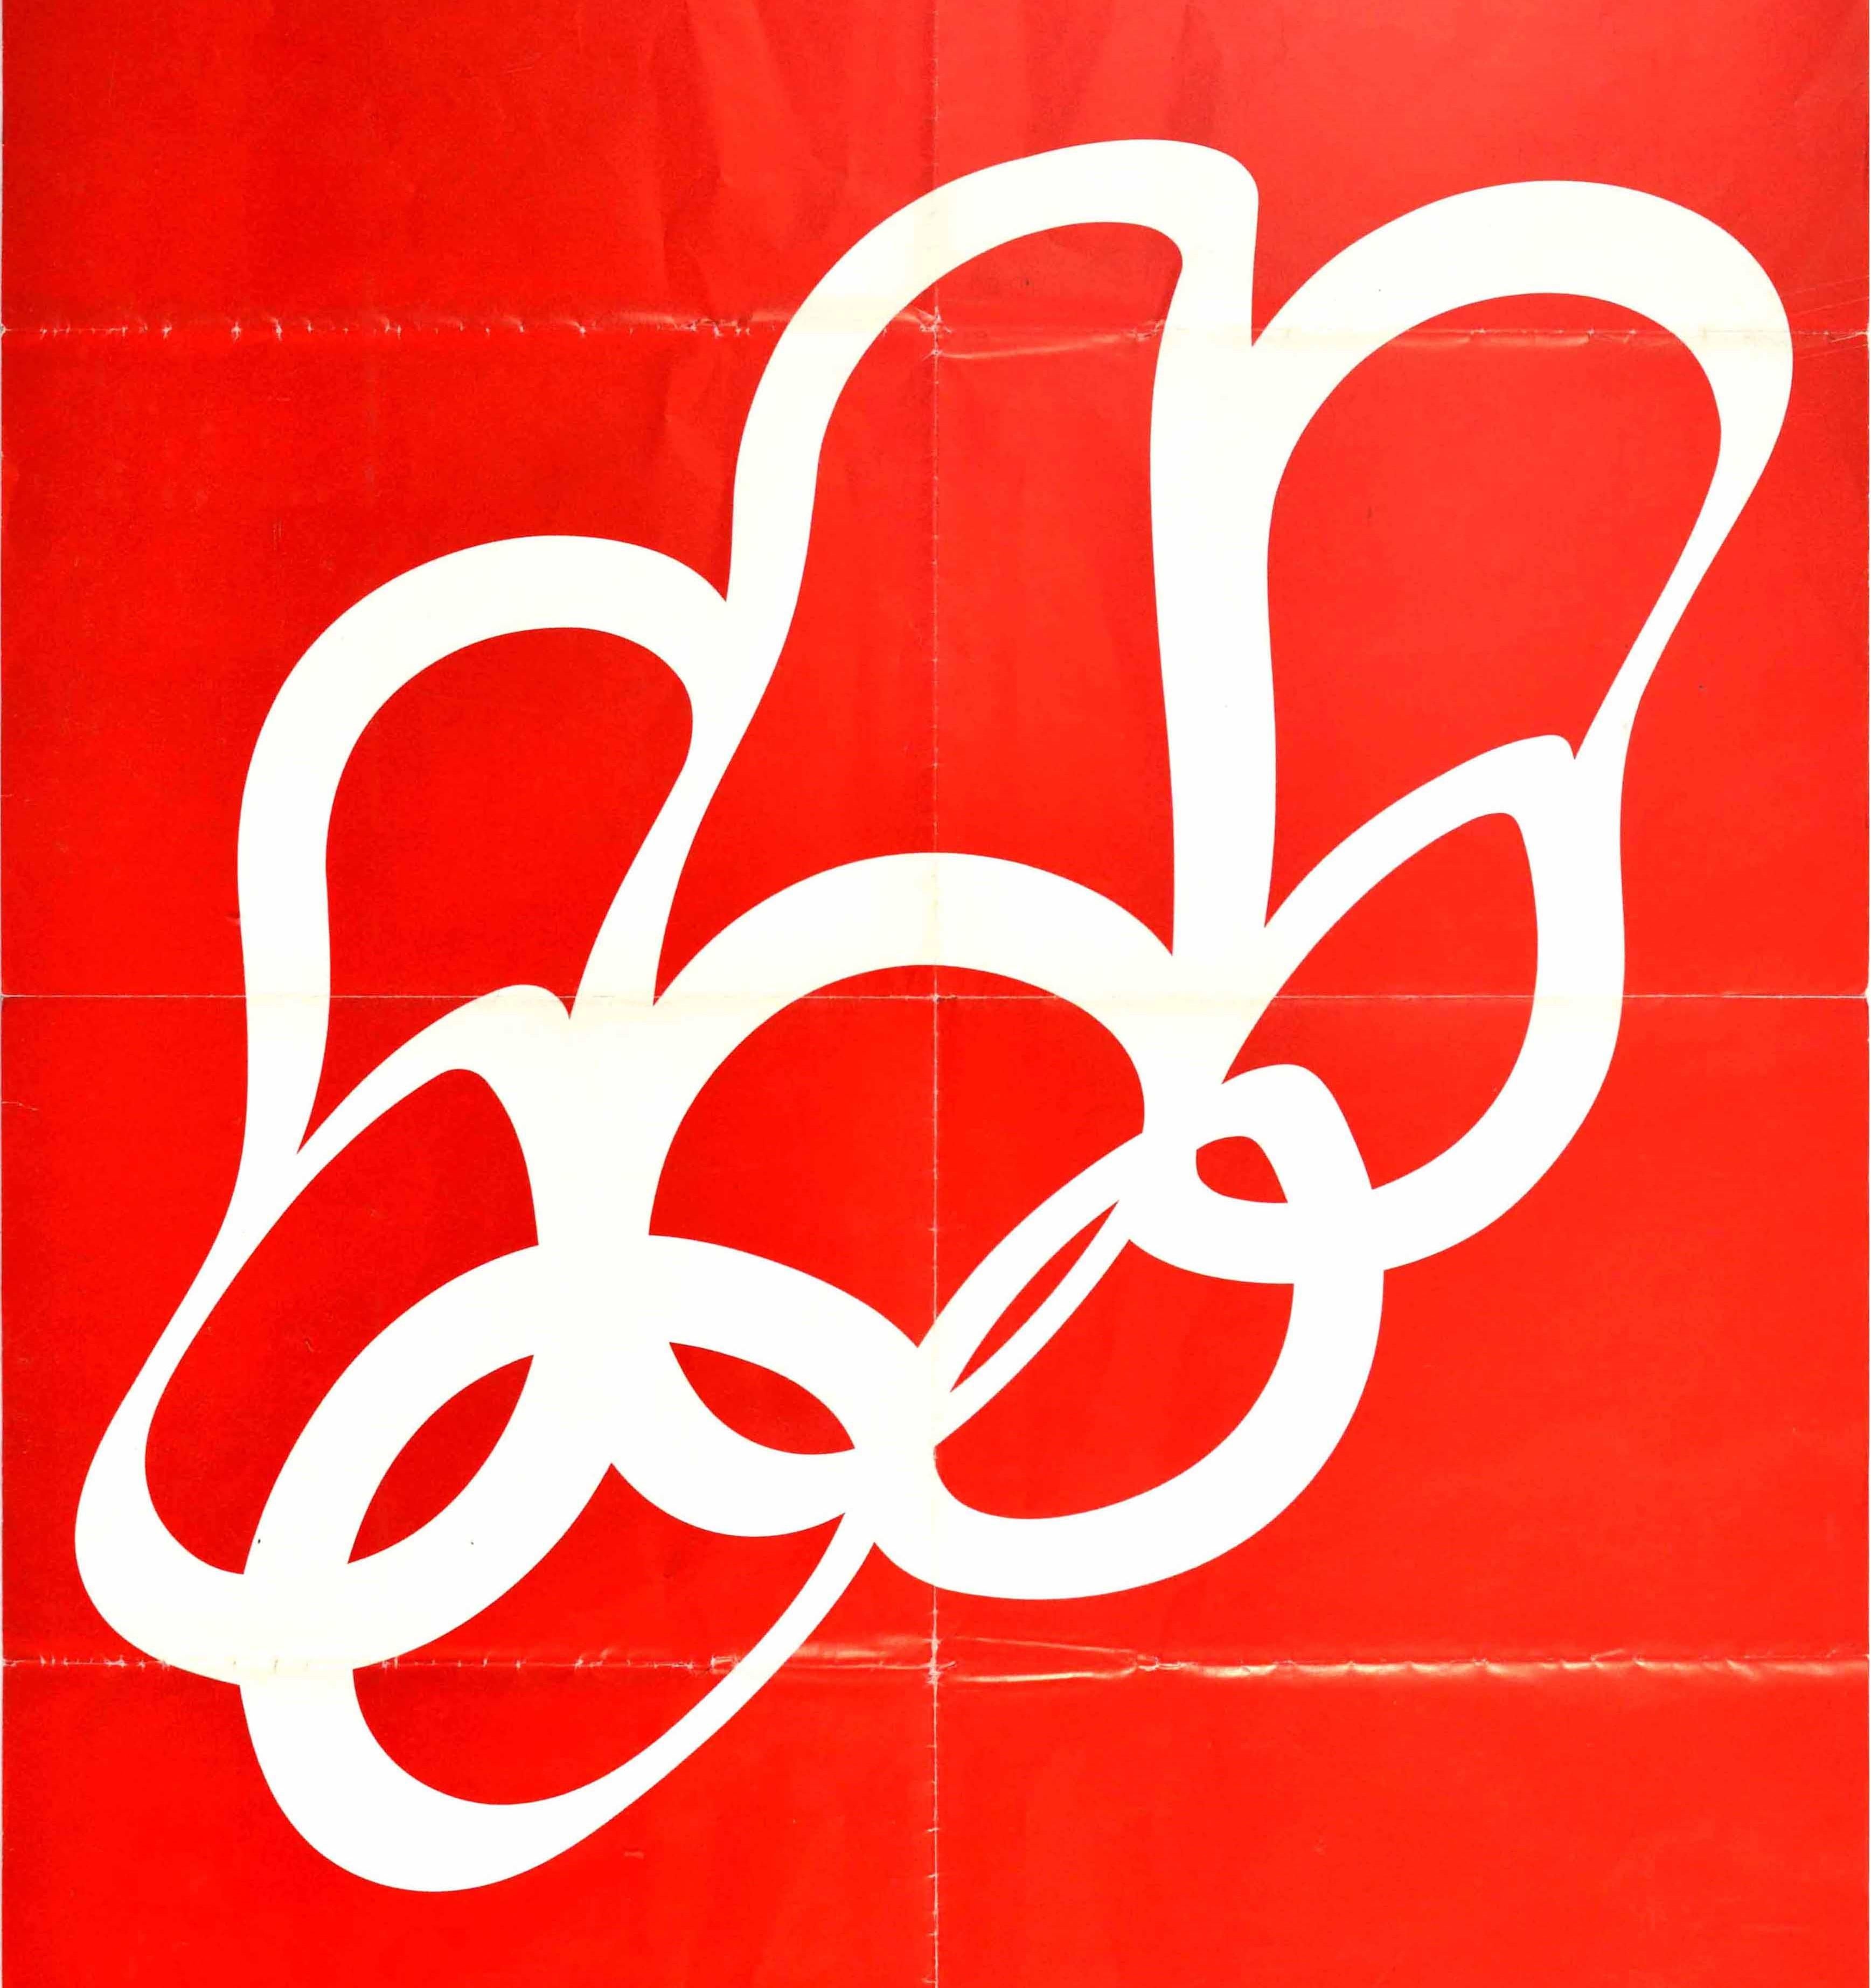 montreal 1976 olympics poster